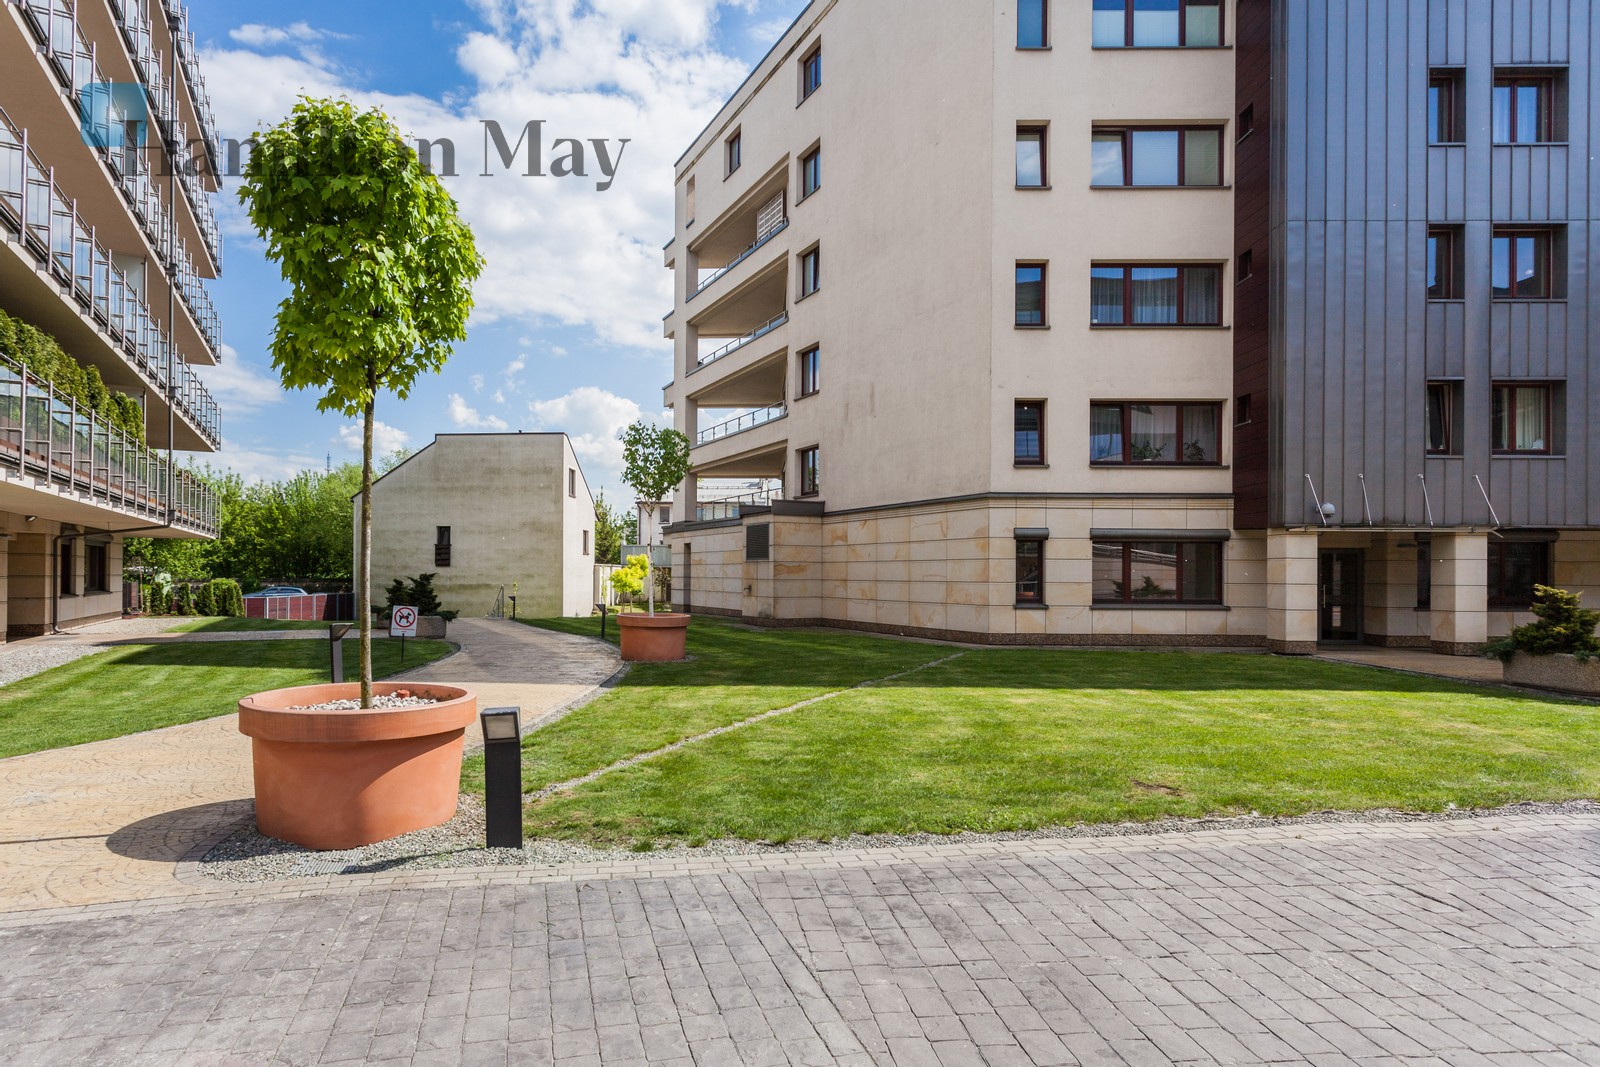 Status: existing Number of units: 270 Sale price from: 60000PLN Avg. sales price/m2: 10500PLN Rental price from: 3000PLN Avg. rental price/m2: 50PLN